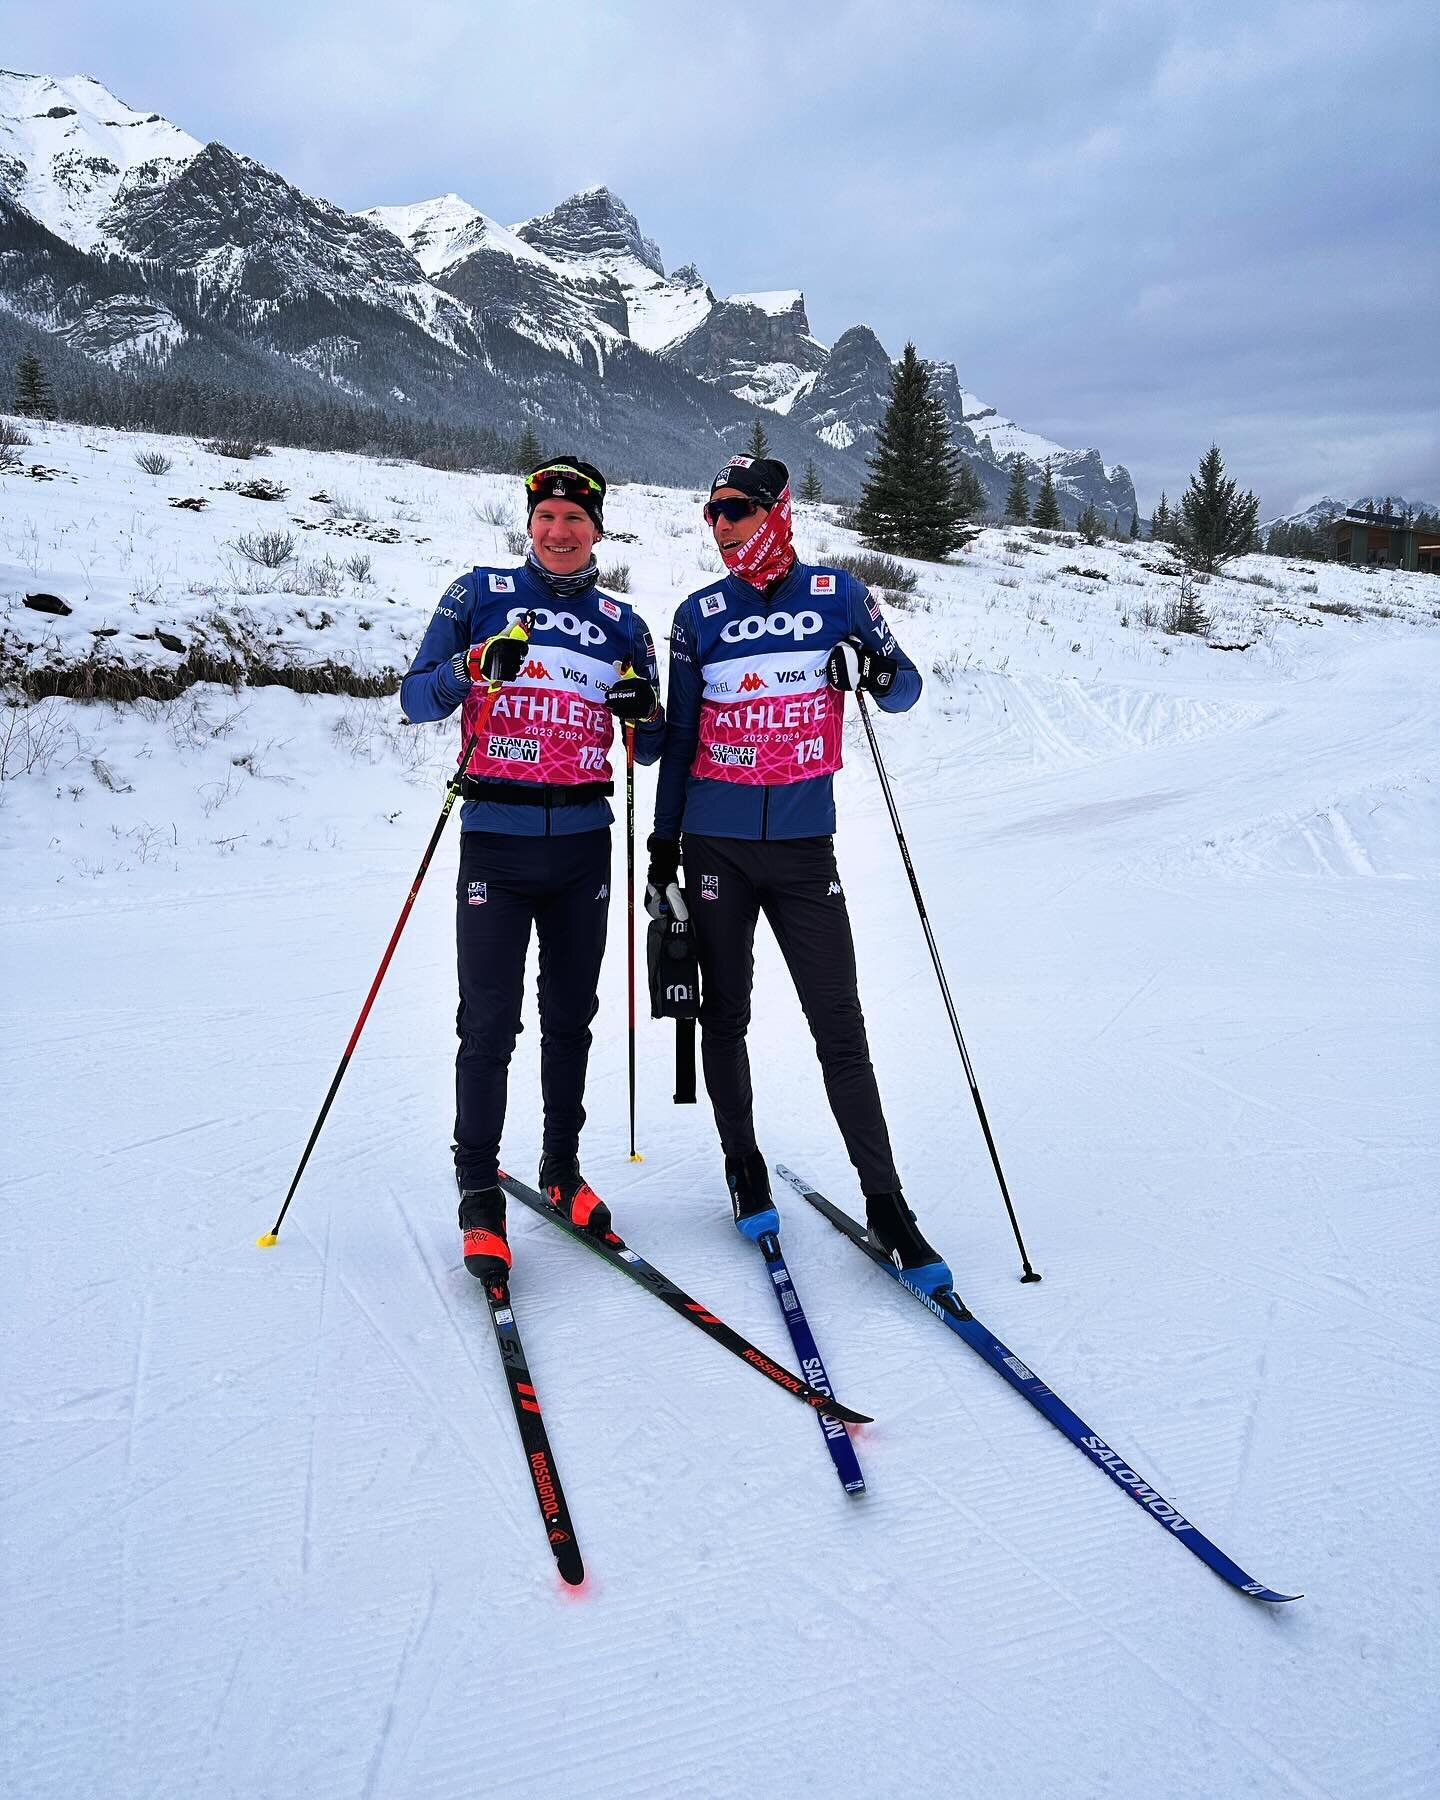 It&rsquo;s time for some World Cups in North America 🤩 Skate Sprint Saturday &amp; Classic Sprint Tuesday &mdash; let&rsquo;s go! 🚀
&bull;
📷: @rganderson 
#teambirkie #stifelusskiteam #oakleyskiing #xcskiing #anotherbestday #canada #canmore